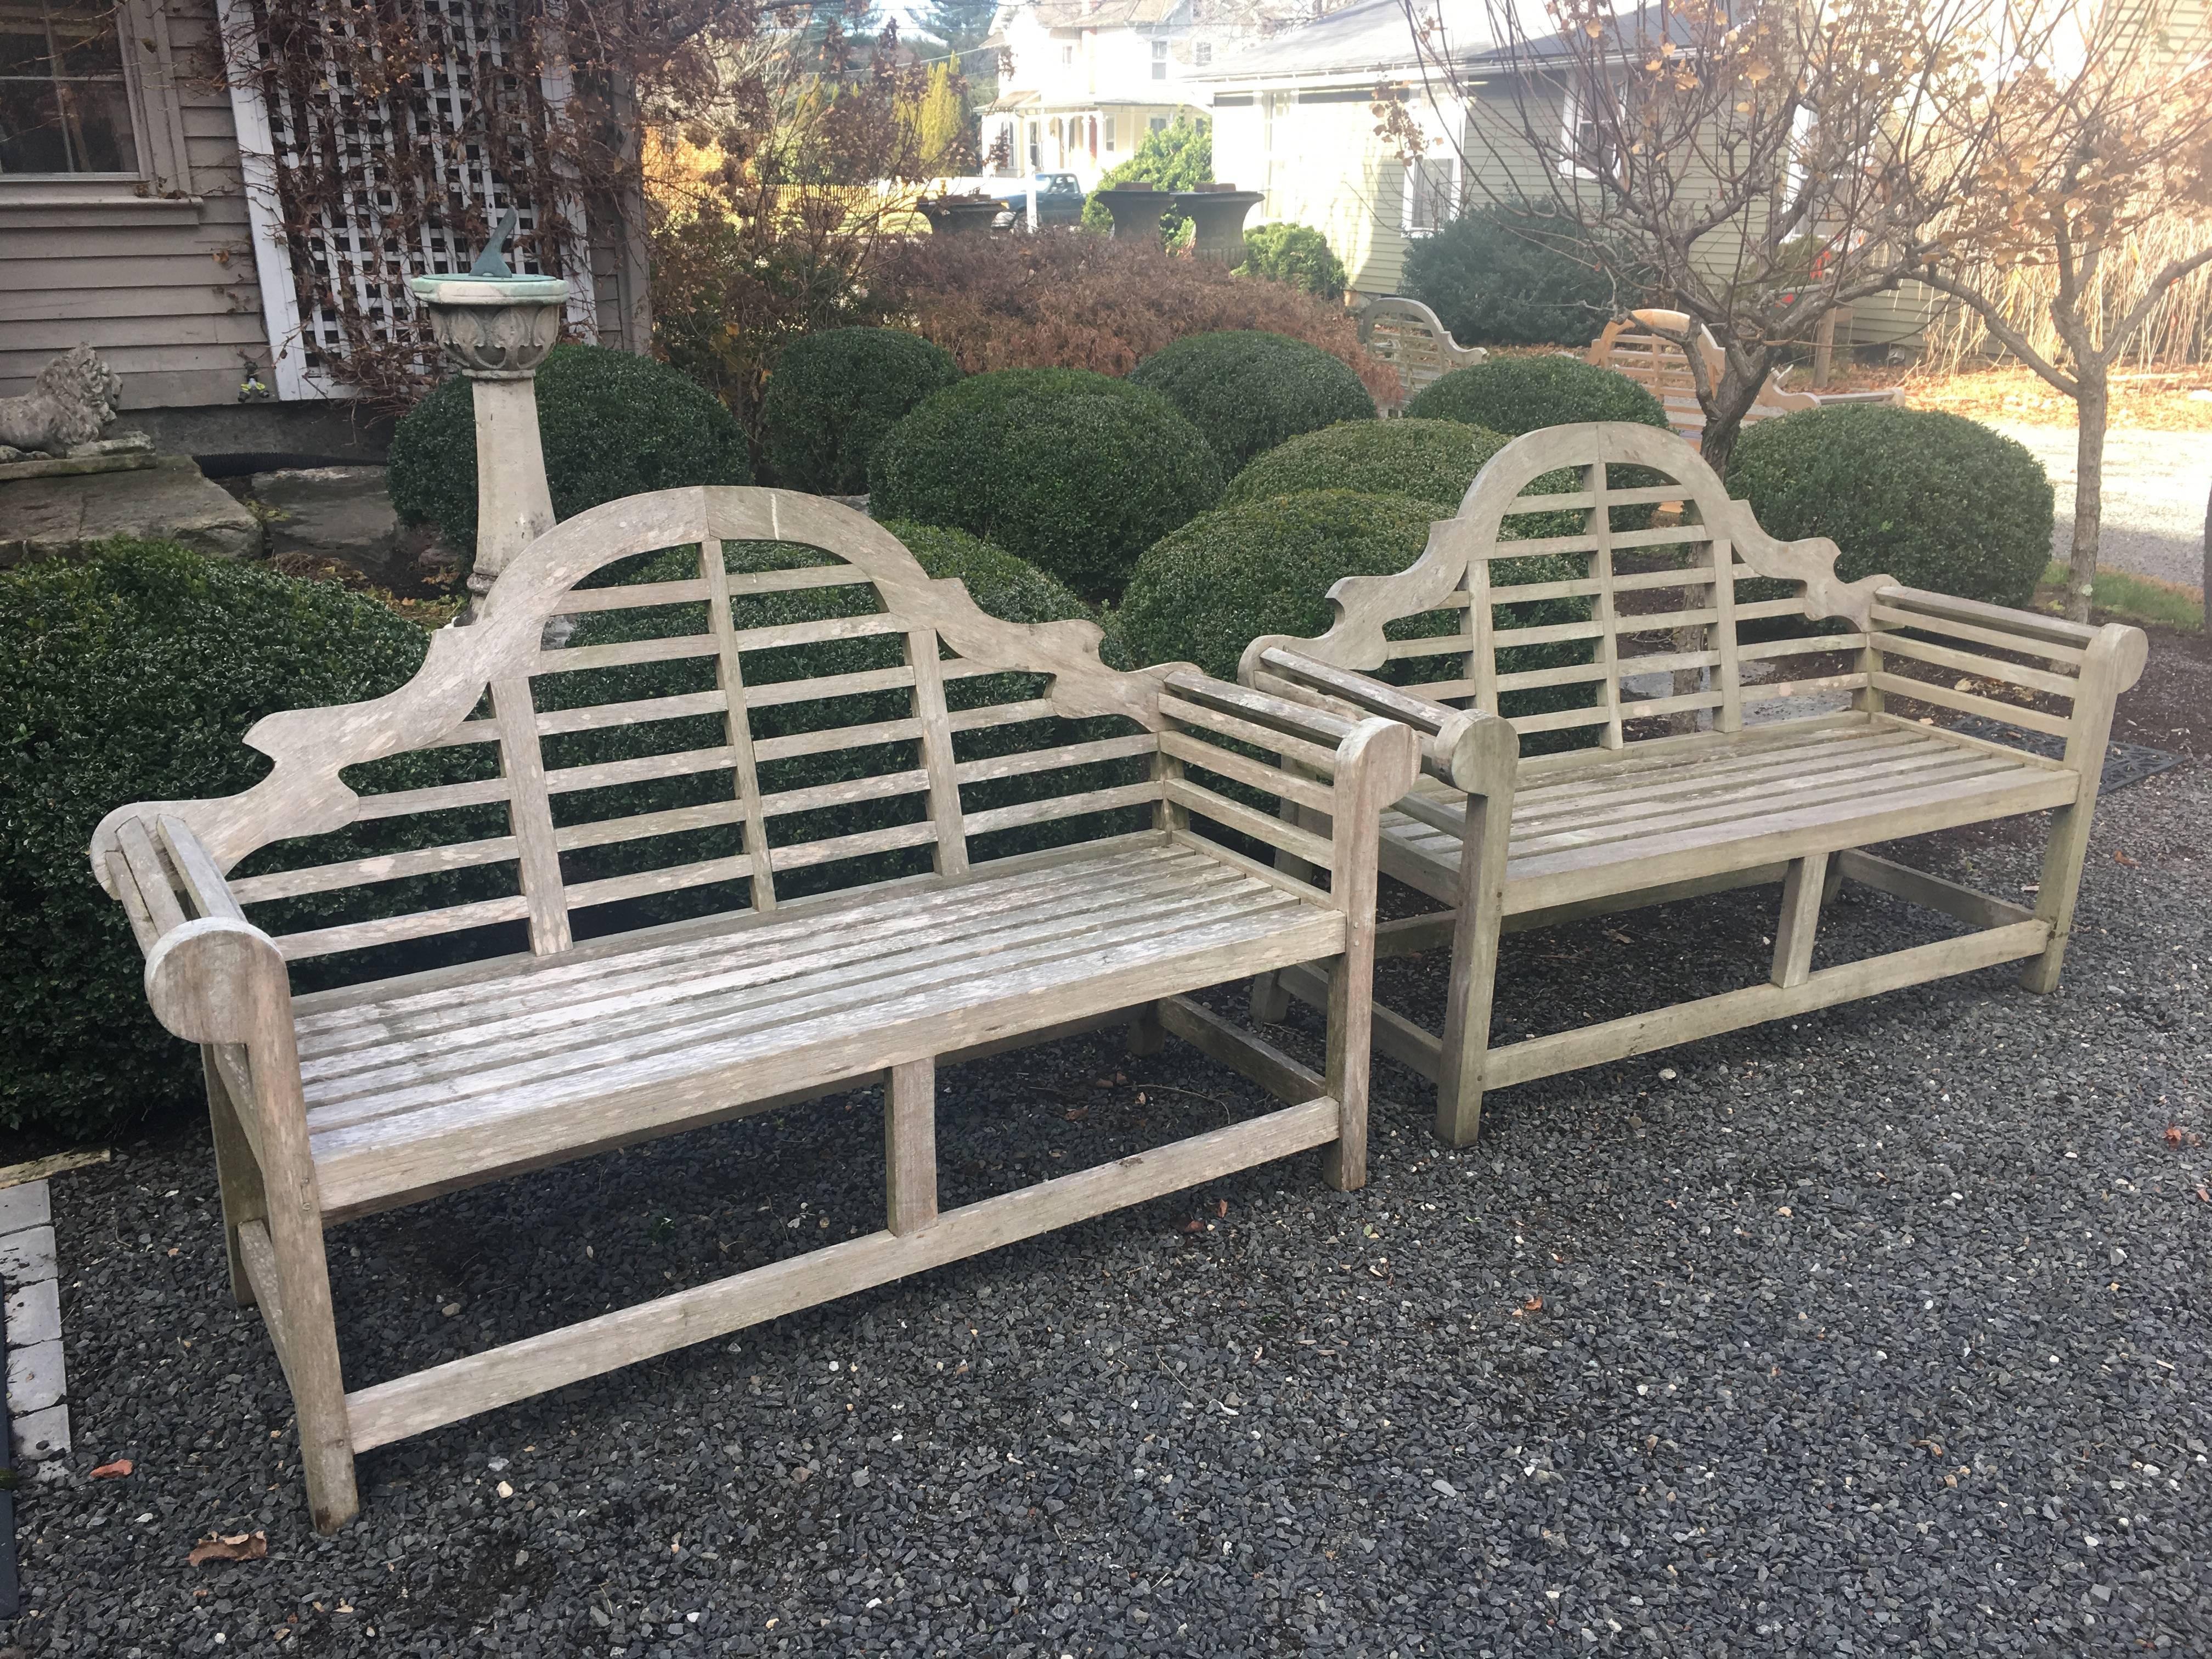 These classical teak benches, originally designed by the famous English architect Sir Edwin Lutyens in the early 1900s, have just enough age to boast a lovely silvered patina, but not so much as to impair their functionality. Perfect against an